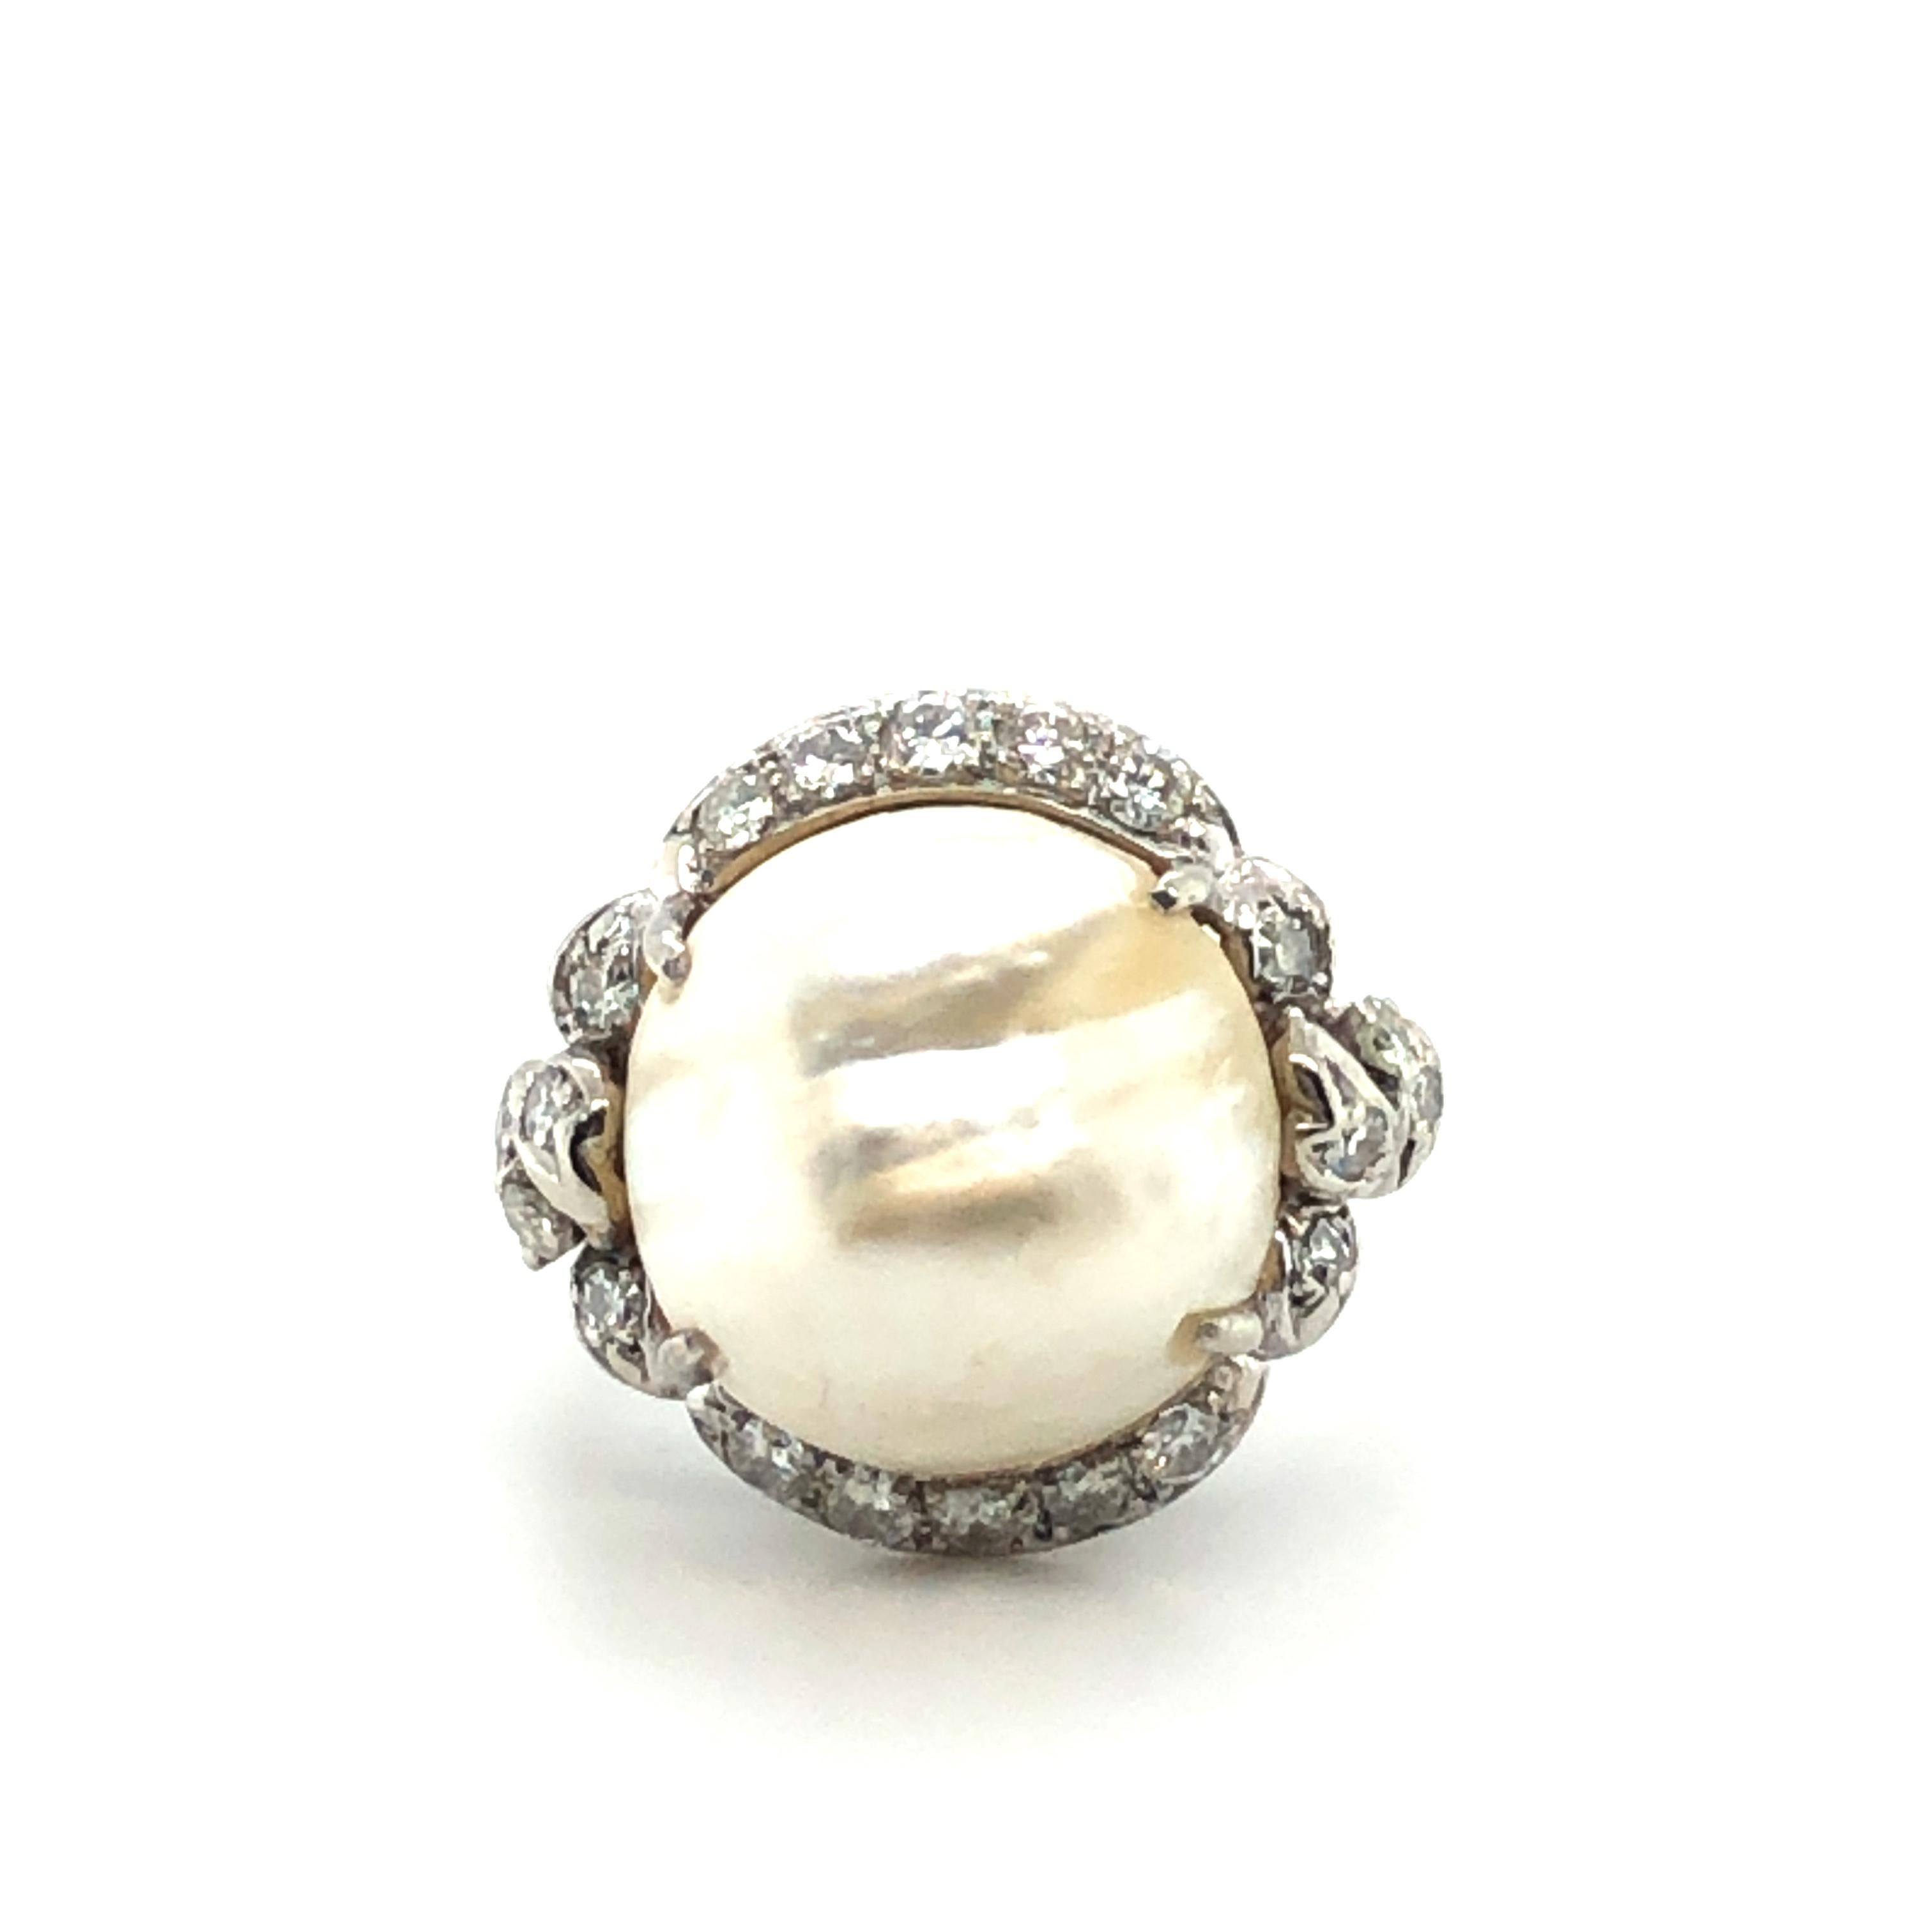 The 20 brilliant- and single-cut diamonds are totalling 0.50 ct and entwine around this beautiful natural blister pearl.
The pearl with a diameter from 13.5 - 13.8 mm / 0.53 - 0.54 inches has a particularly soft sheen like silver white silk.
The